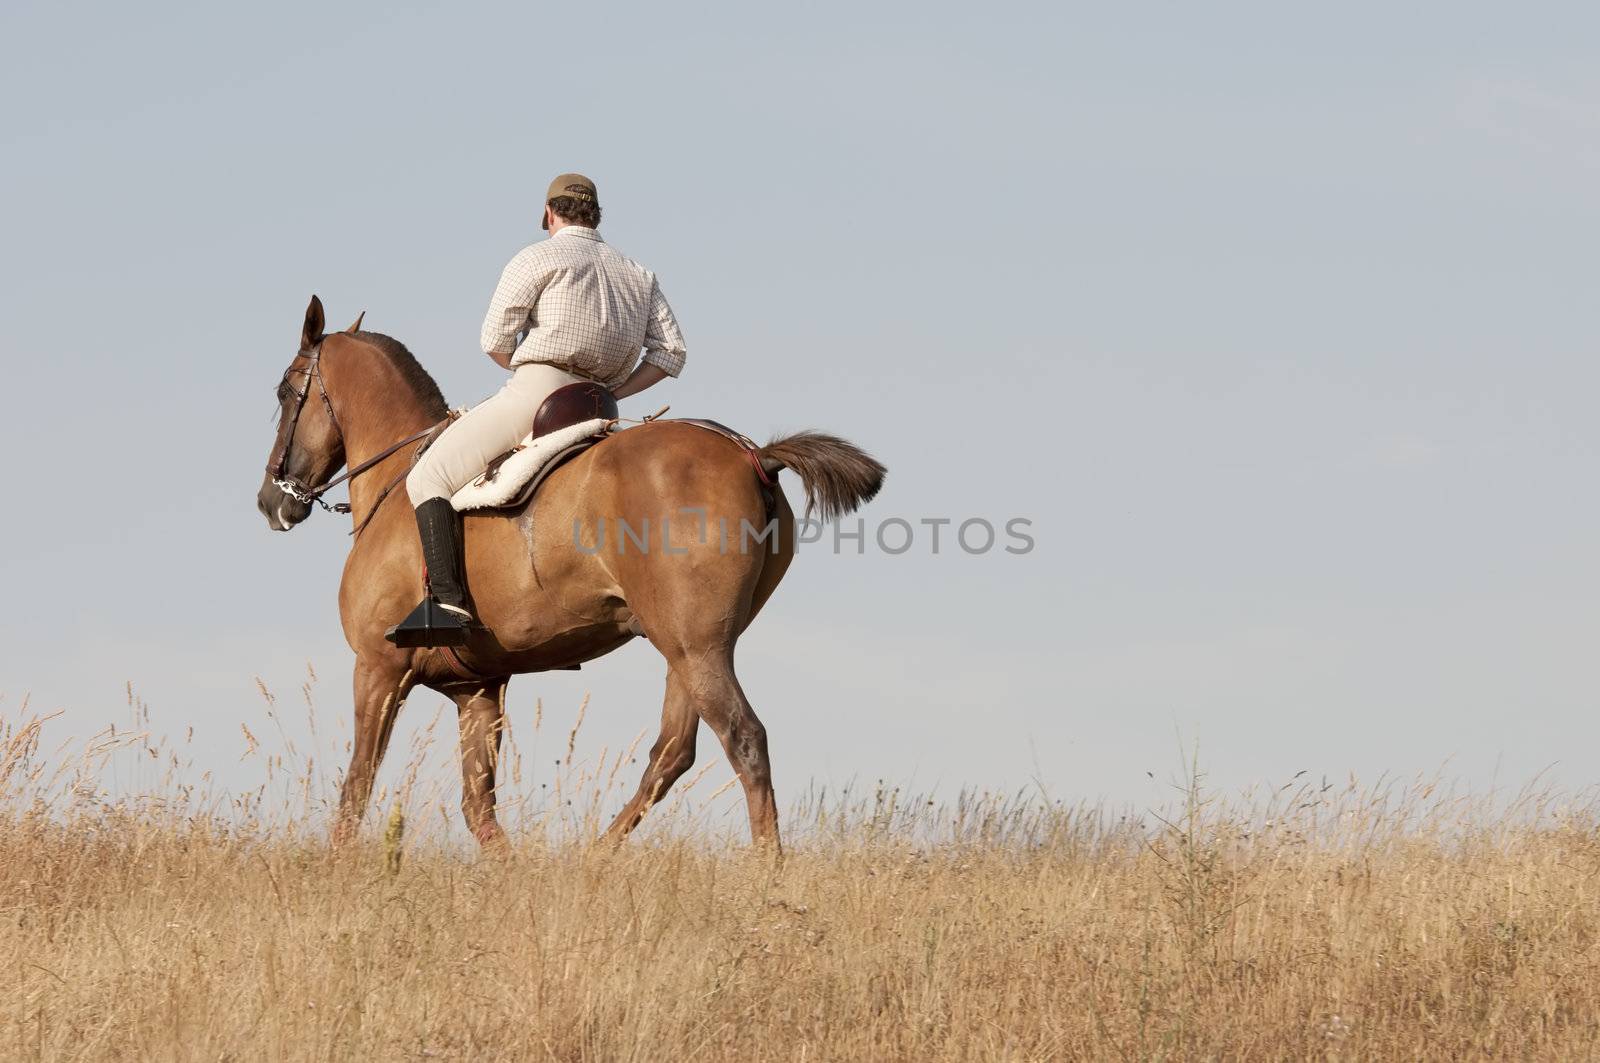 practicing with his horse rider dressage in nature
